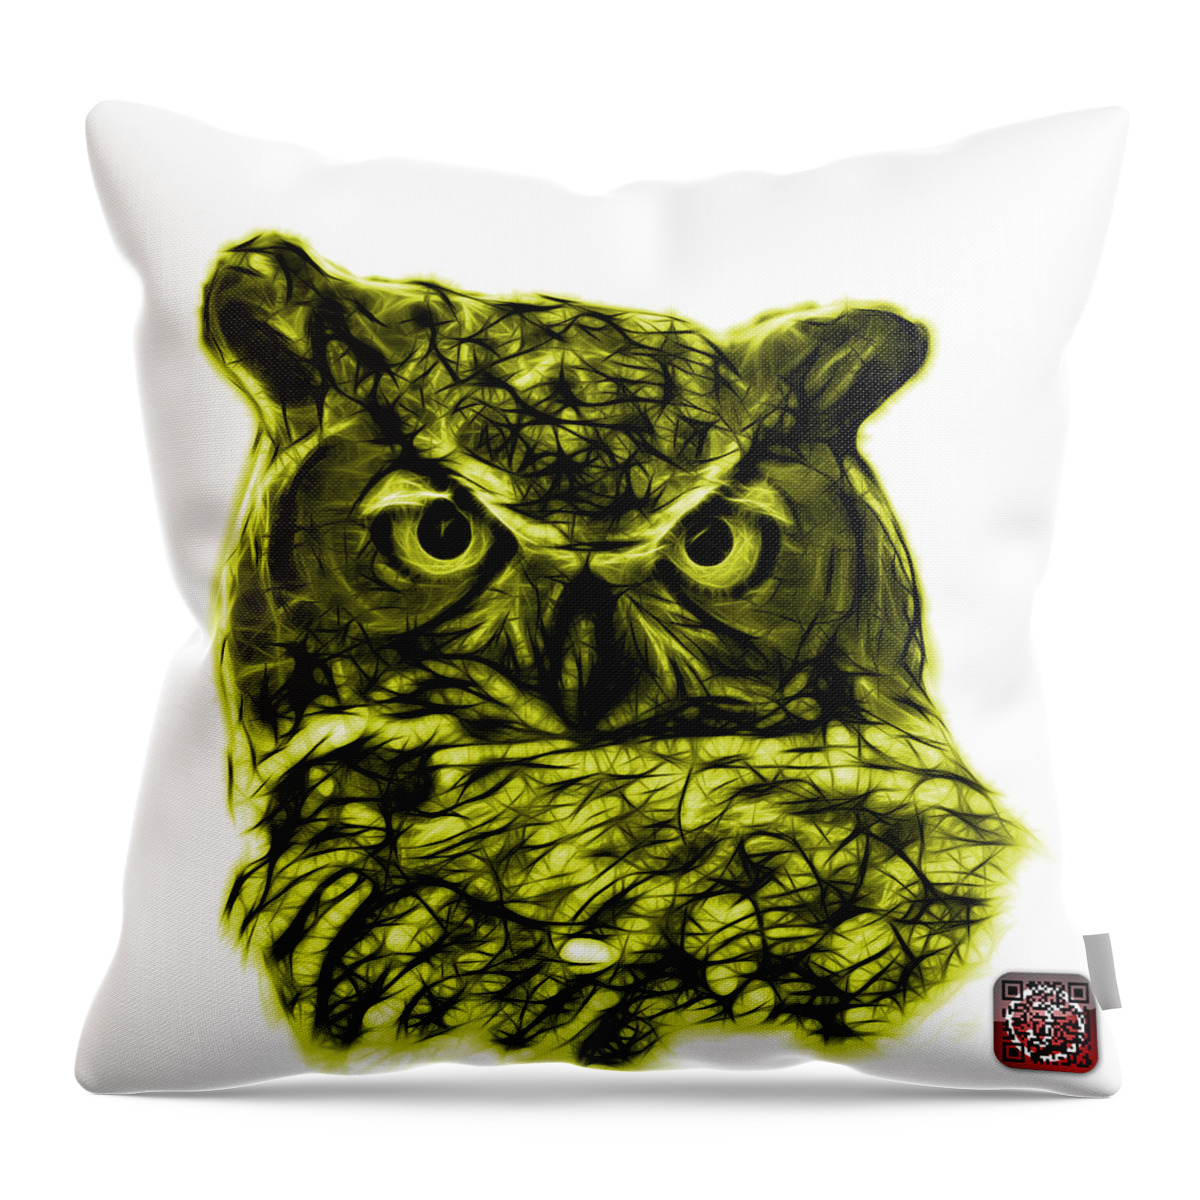 Owl Throw Pillow featuring the digital art Yellow Owl 4436 - F S M by James Ahn